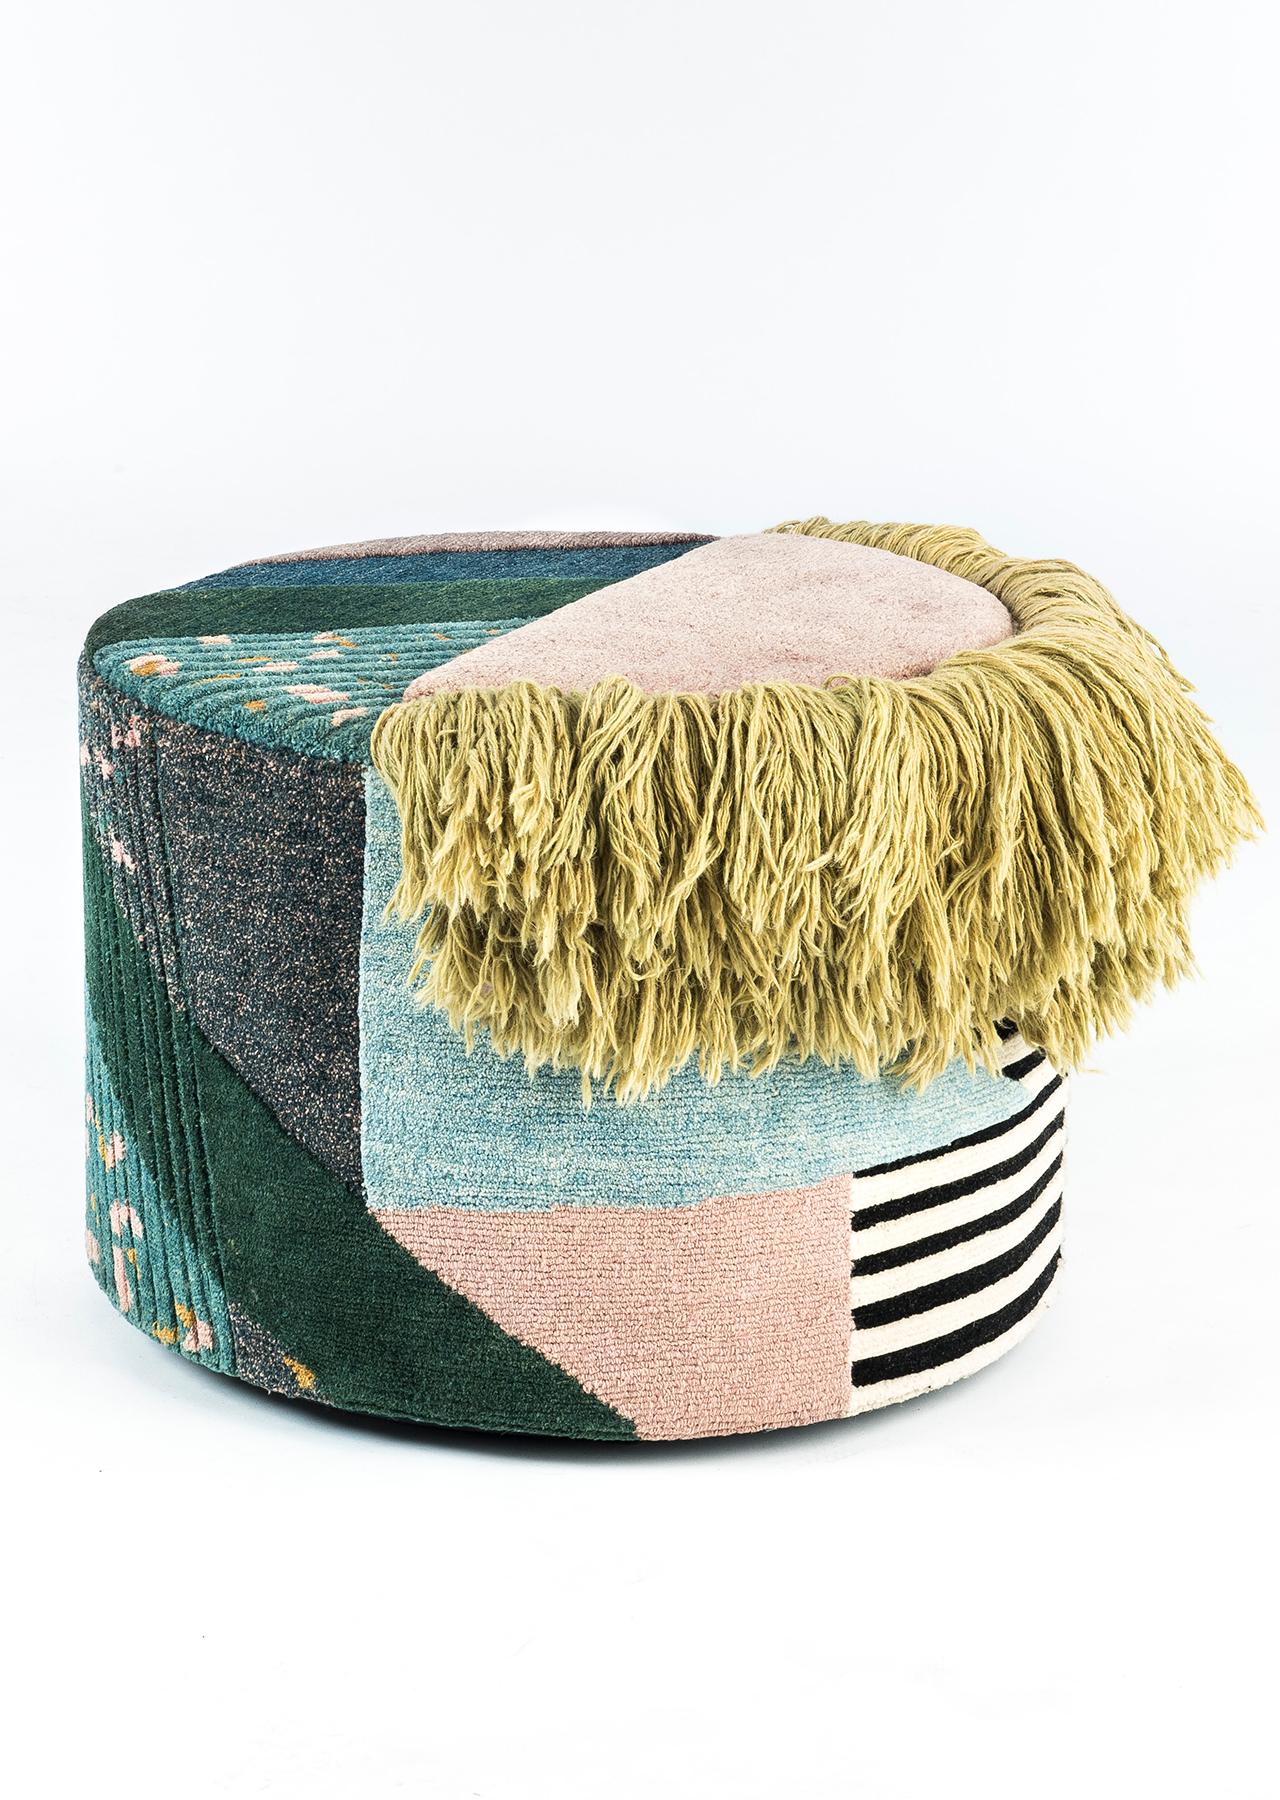 Pouf Charaktere colette by Lyk Carpet
Dimensions: Ø 62 x H 47 cm.
Materials: 100% tibetan highland-wool,new pure hand-combed and hand-spun wool, natural vegetable-dyed wool, 100 knots per square inch.
Hand-knotted, each object is upholstered to the